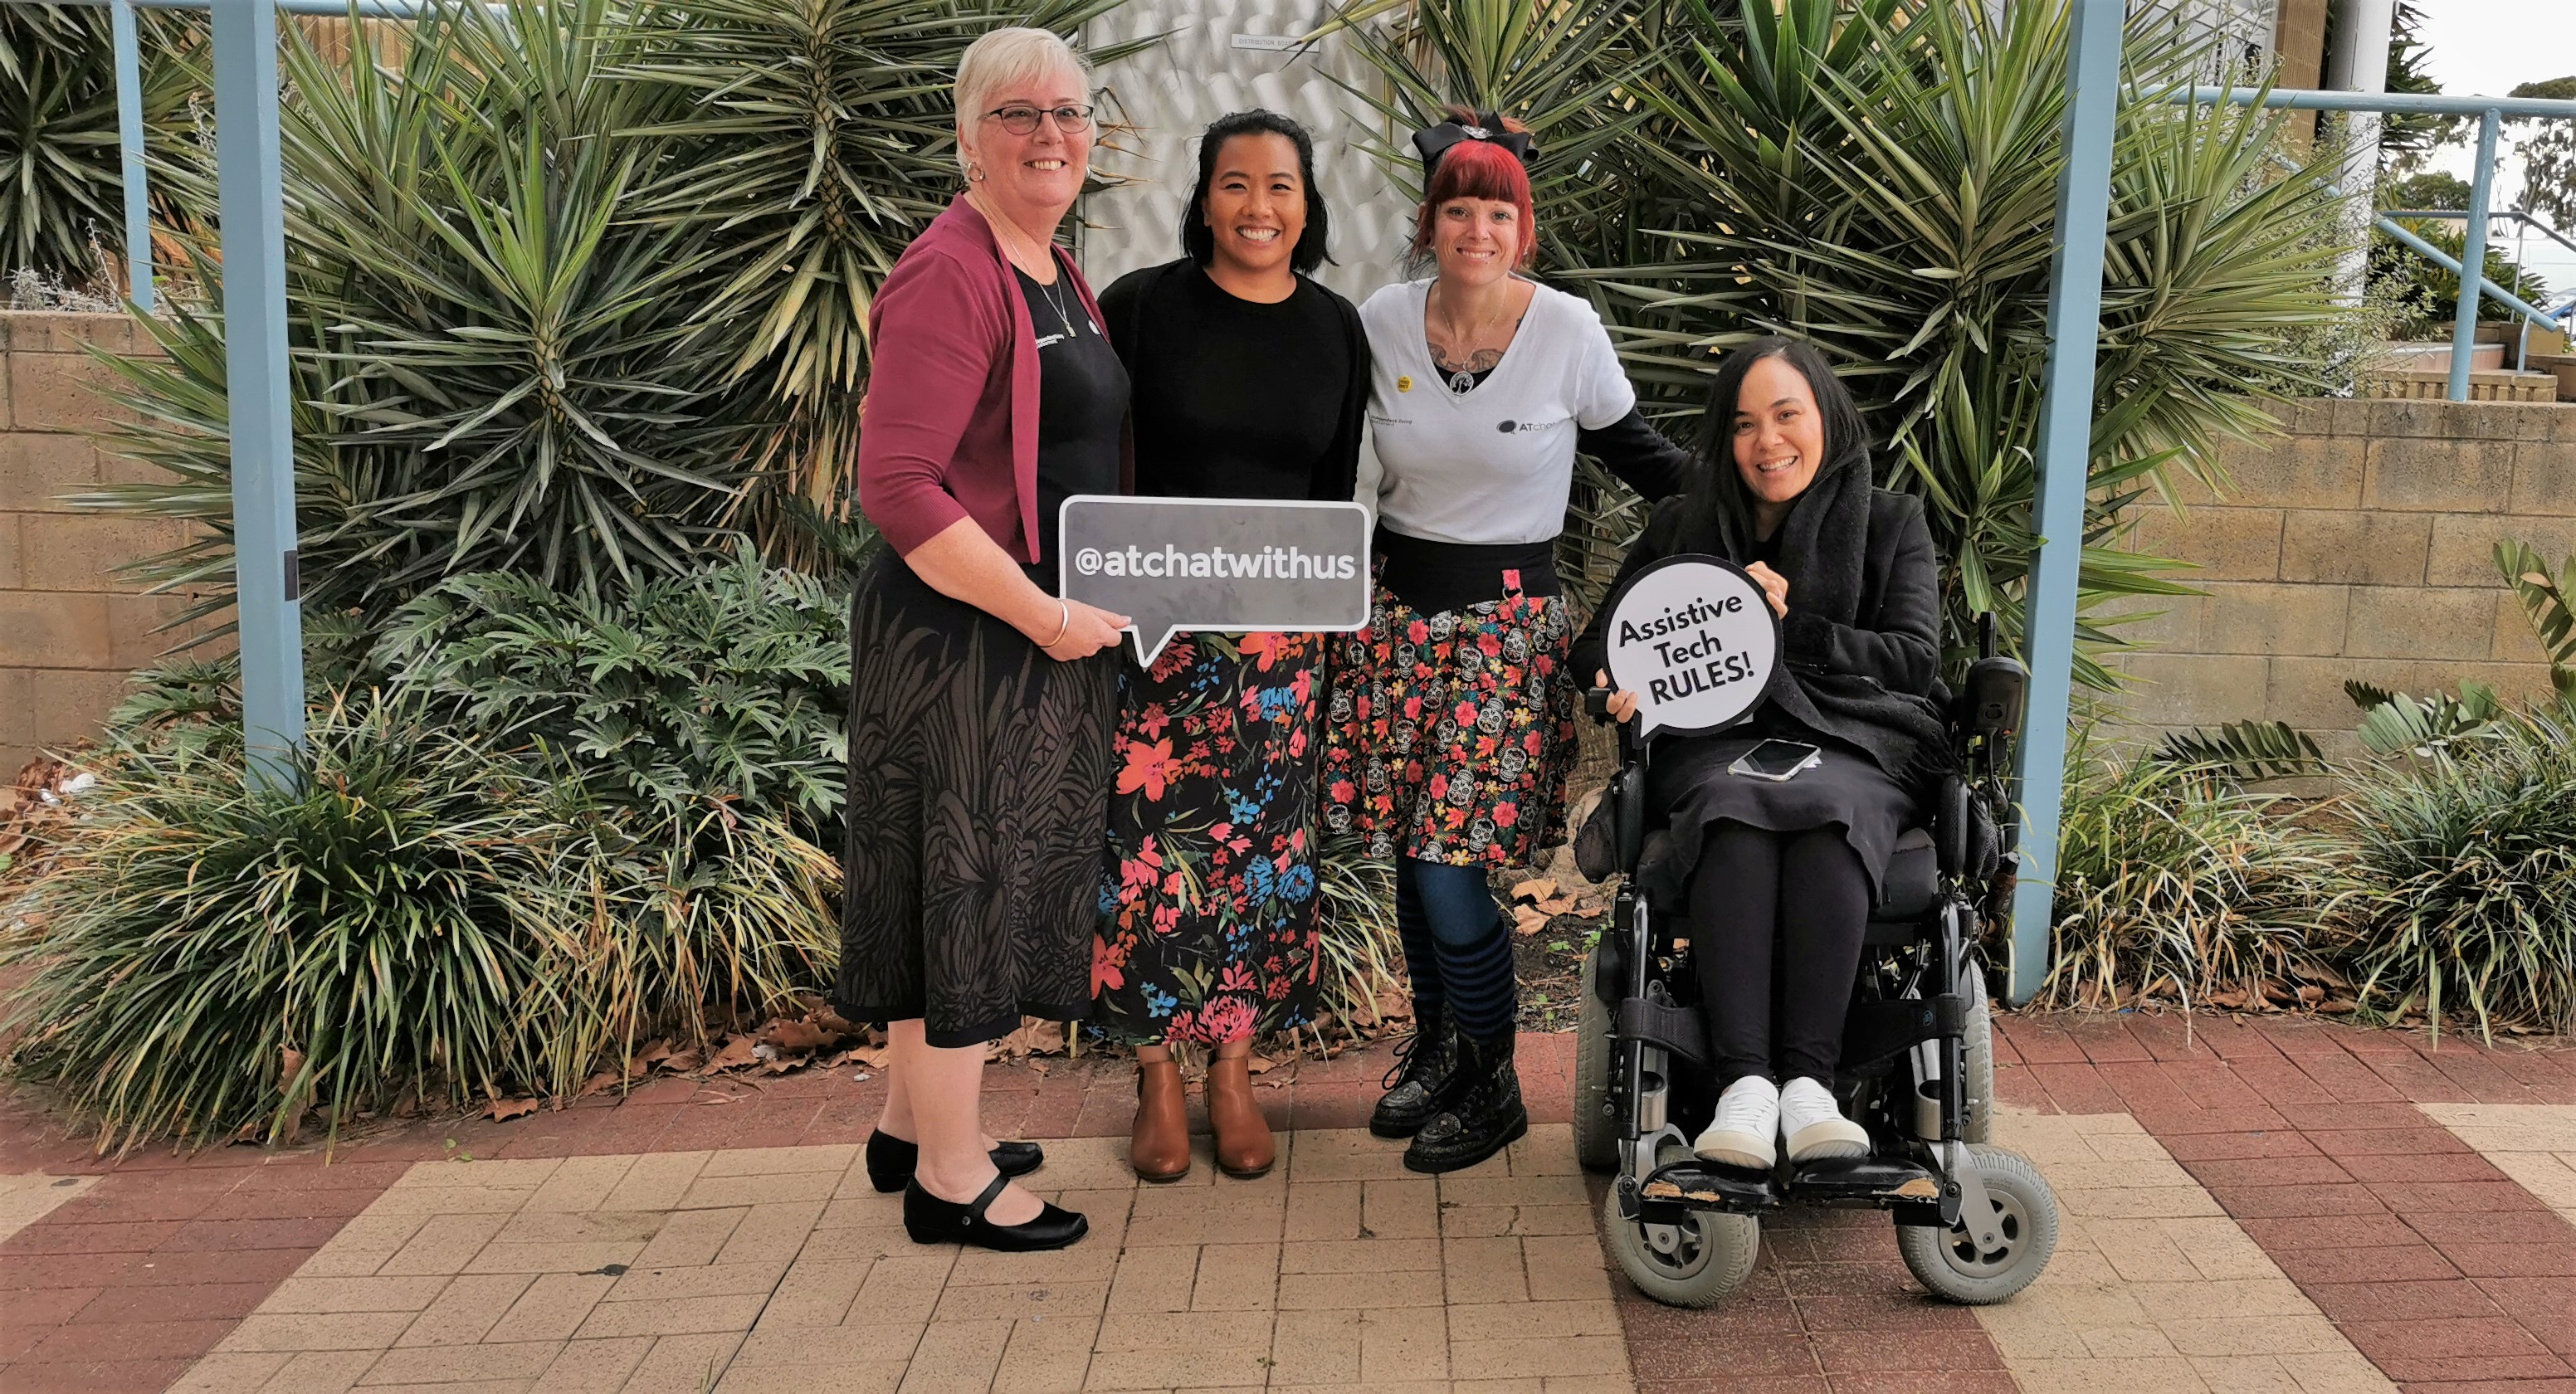 Four women gather together in front of the garden and smile holding AT signs.